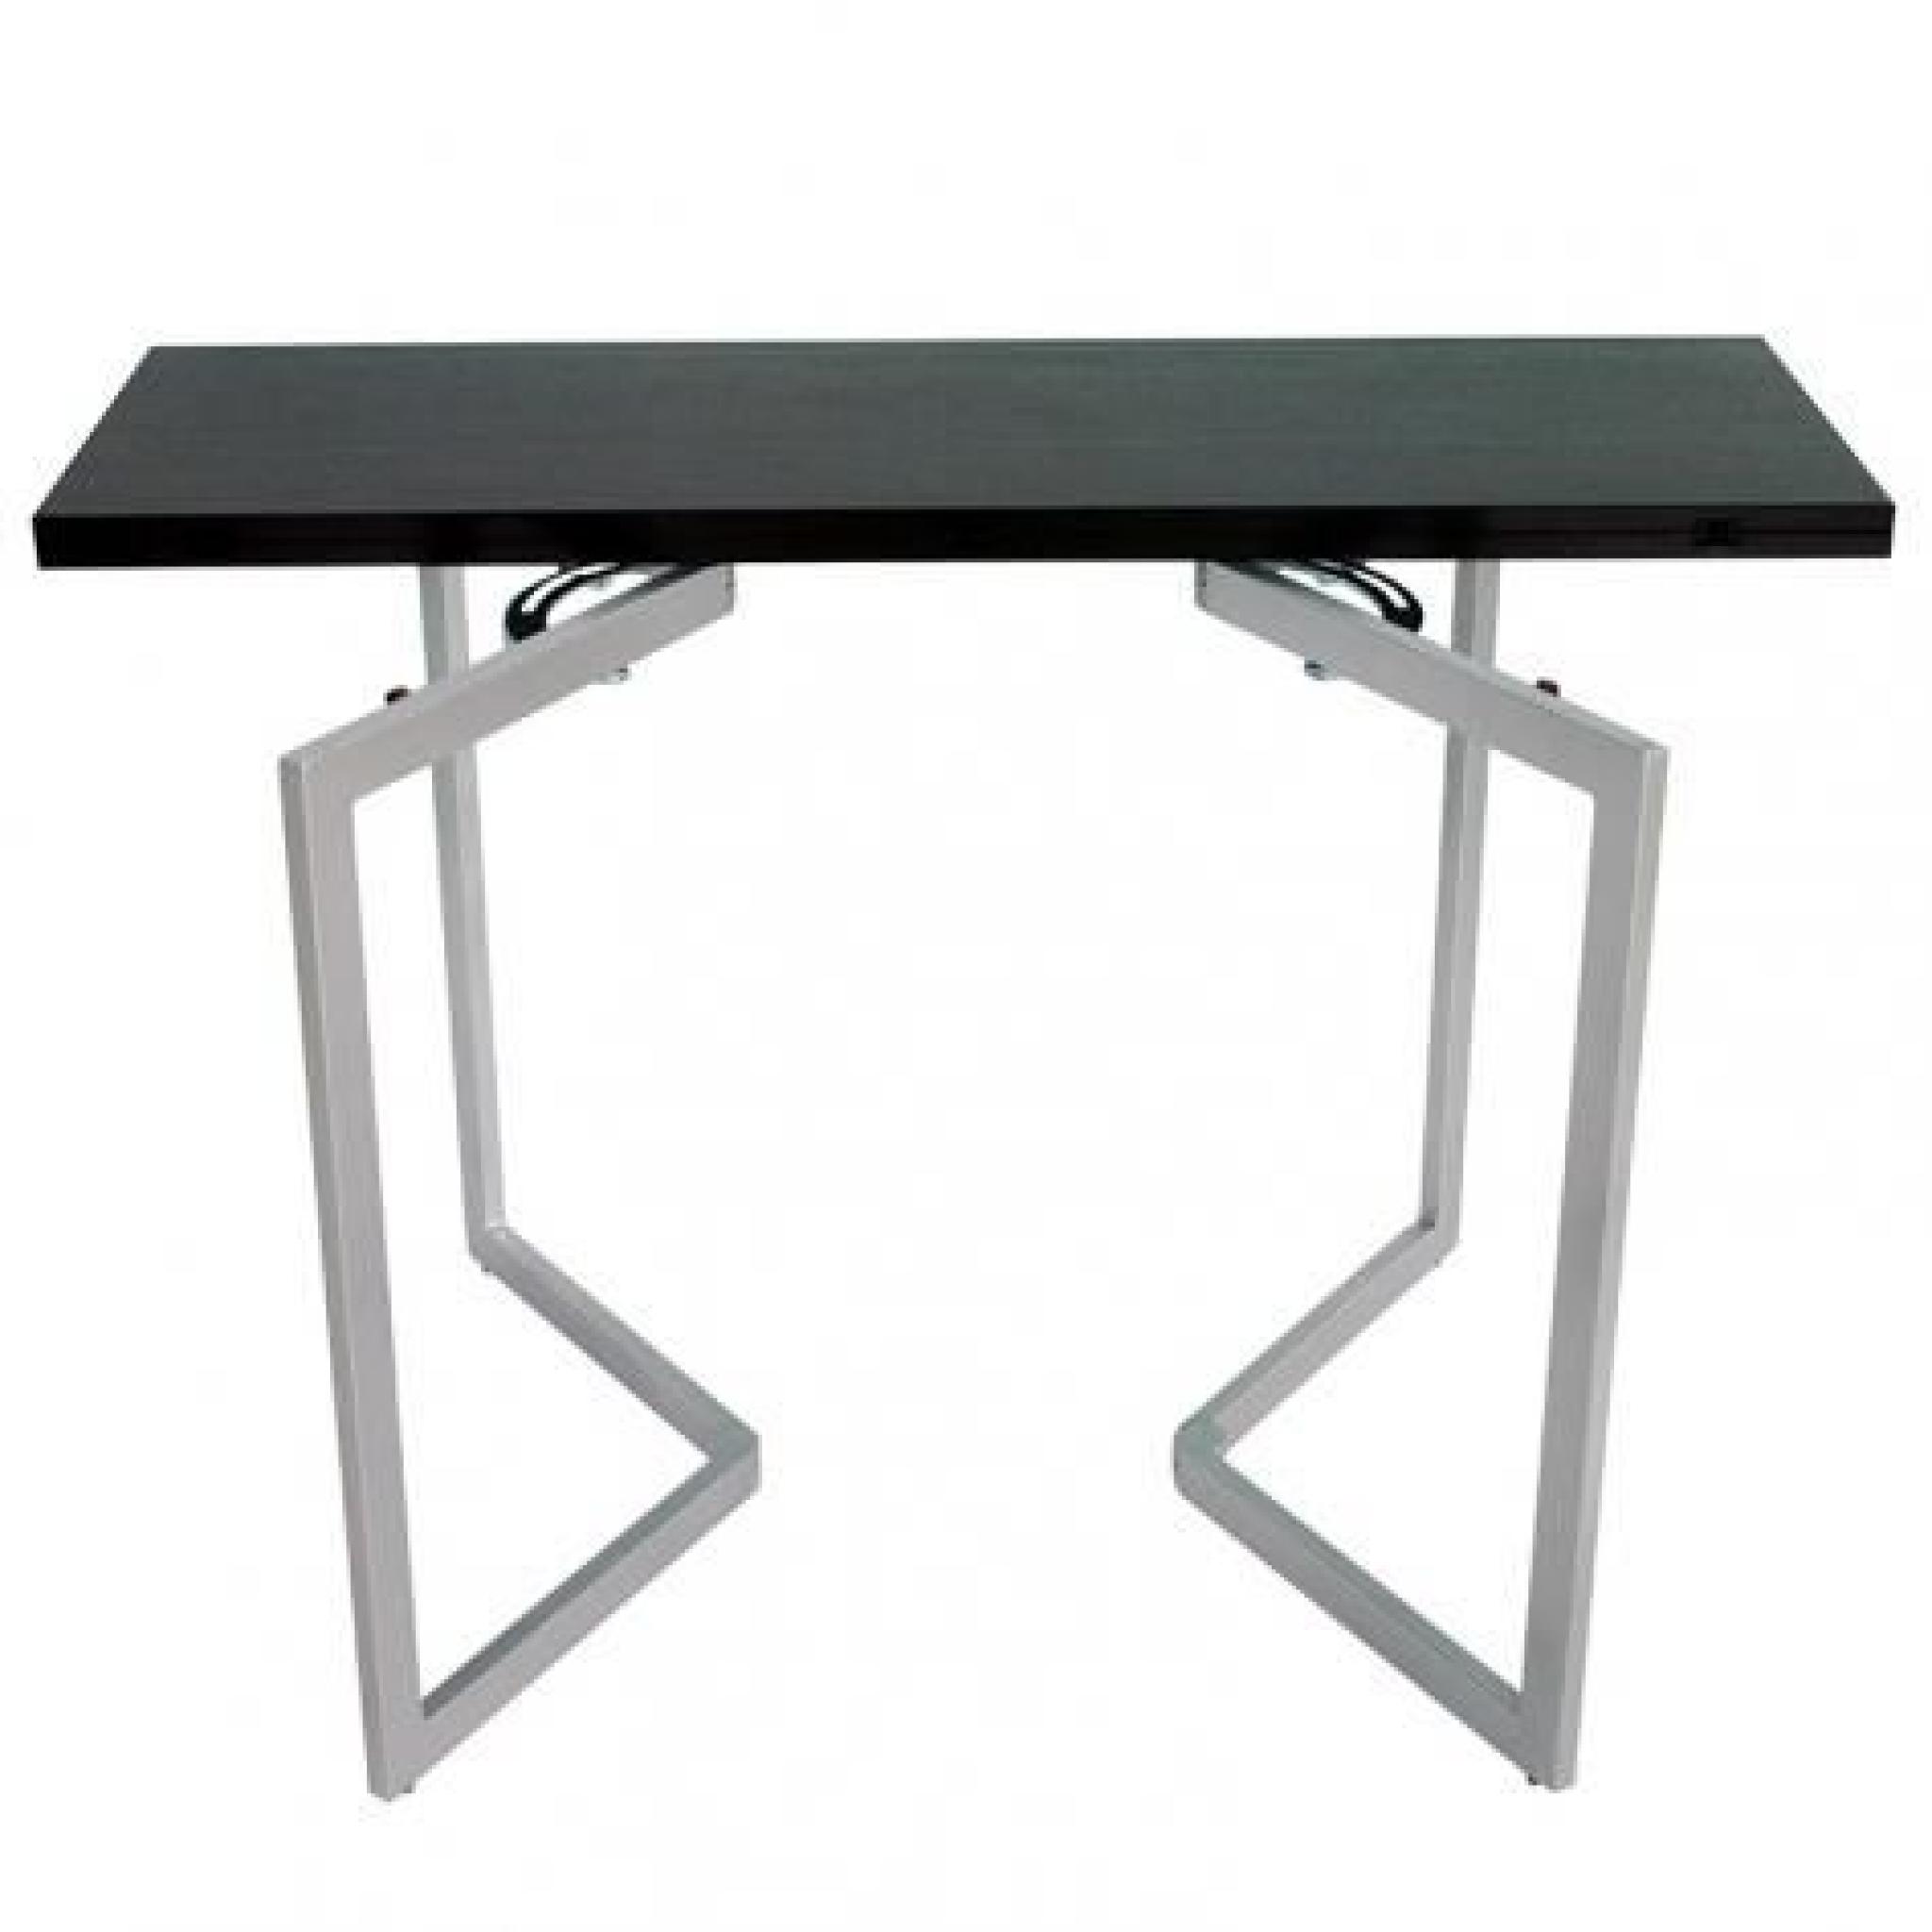 Table console mural extensible wenge XENA pas cher